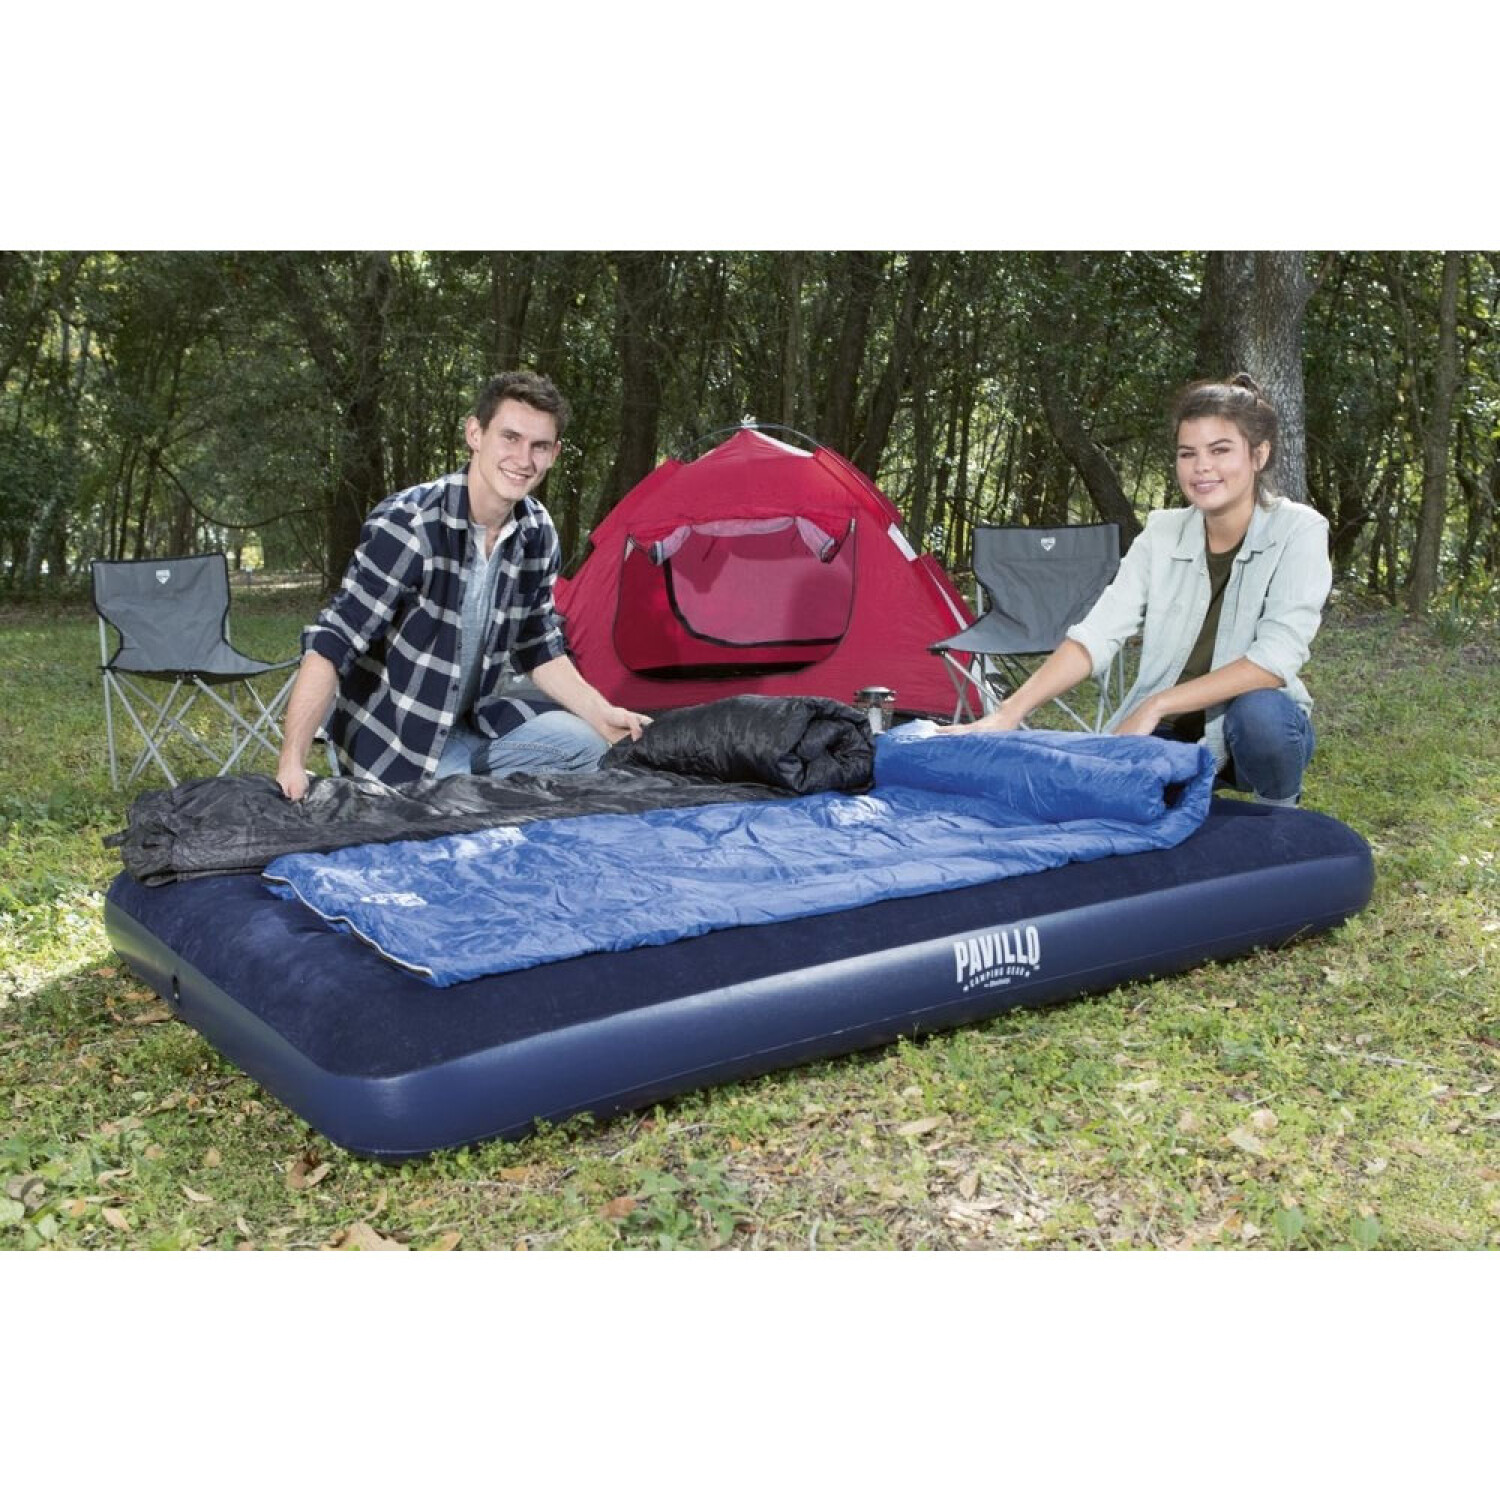 Colchon Inflable 2 Plaza Bestway Ideal Camping Calidad Hts - Azul — HTS